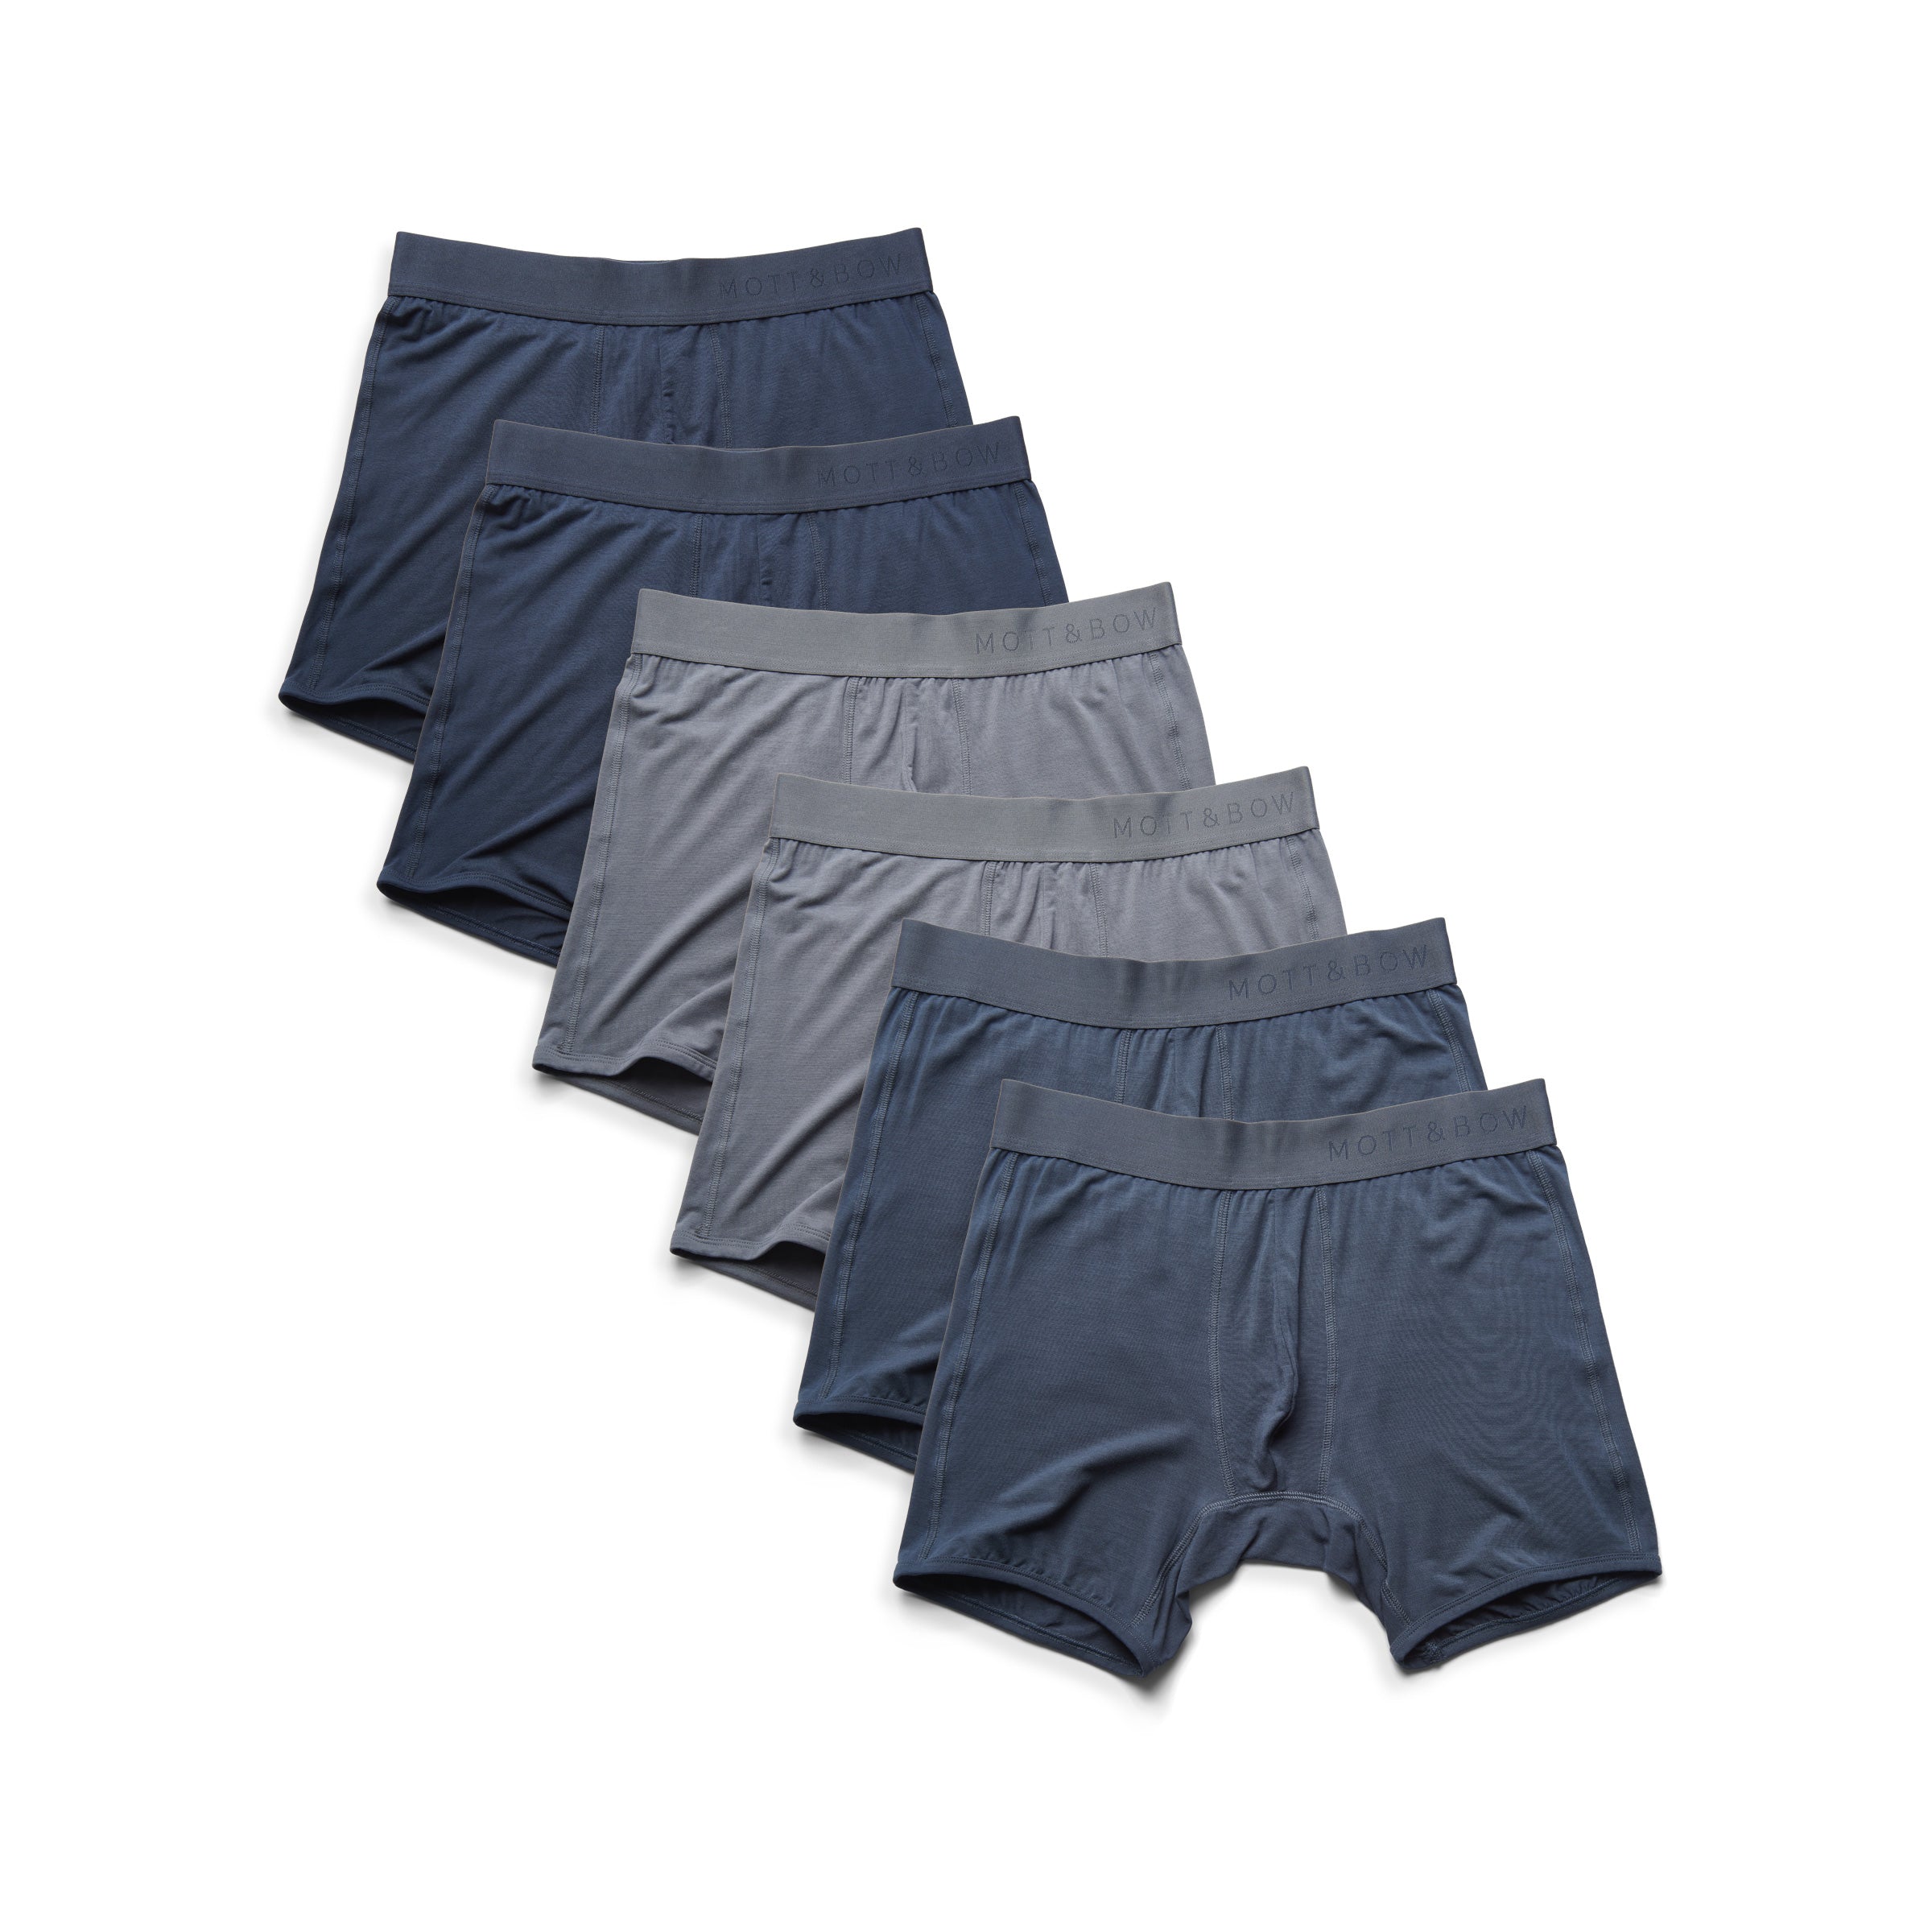  wearing Navy/Steel Gray/Gray Boxer Brief 6-Pack